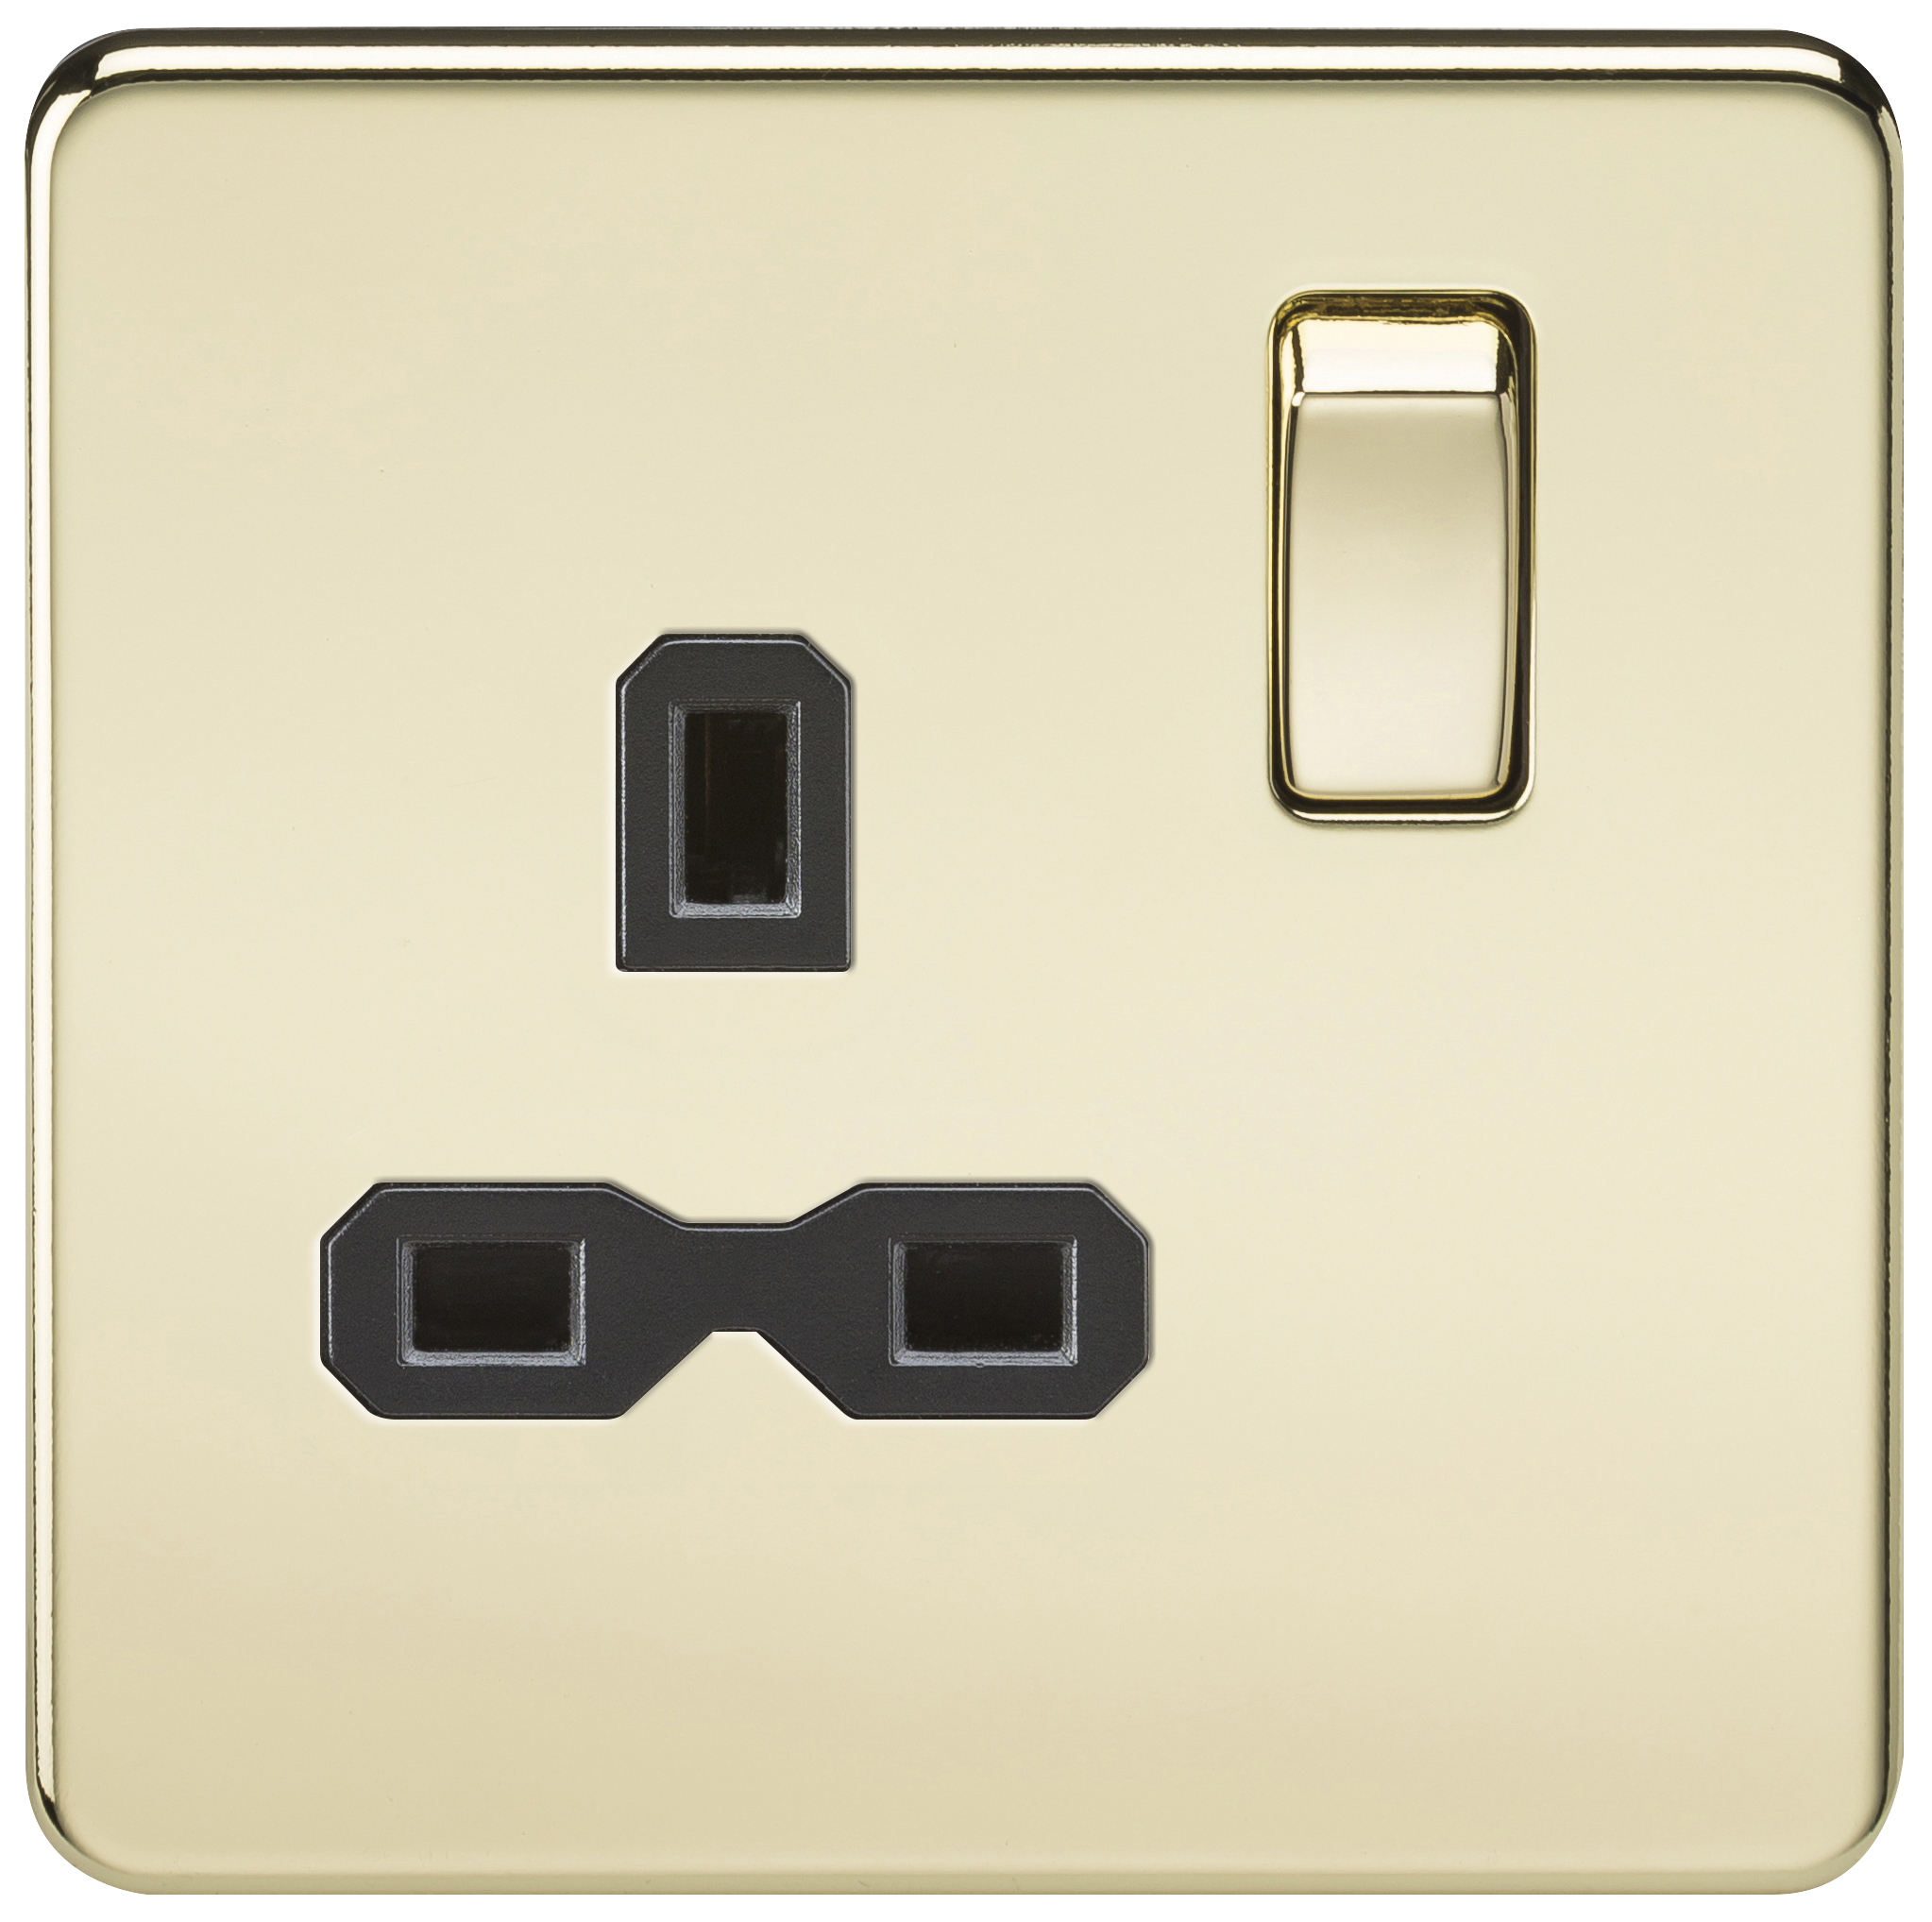 Screwless 13A 1G DP Switched Socket - Polished Brass With Black Insert - SFR7000PB 